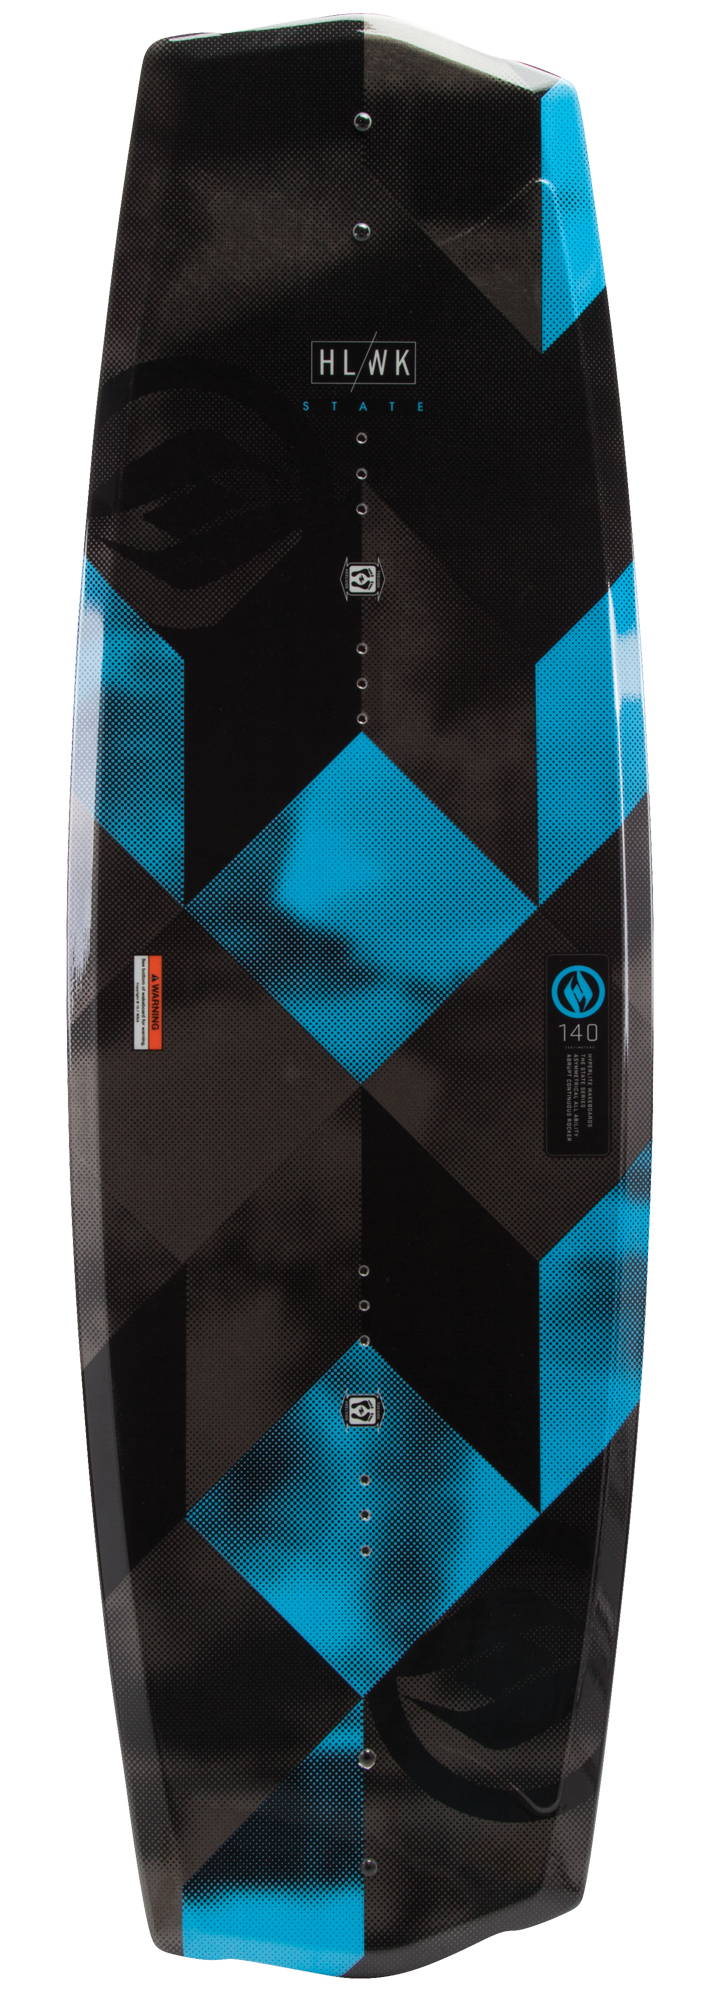 wake and snowboards sized at 130 at 88 Gear sports